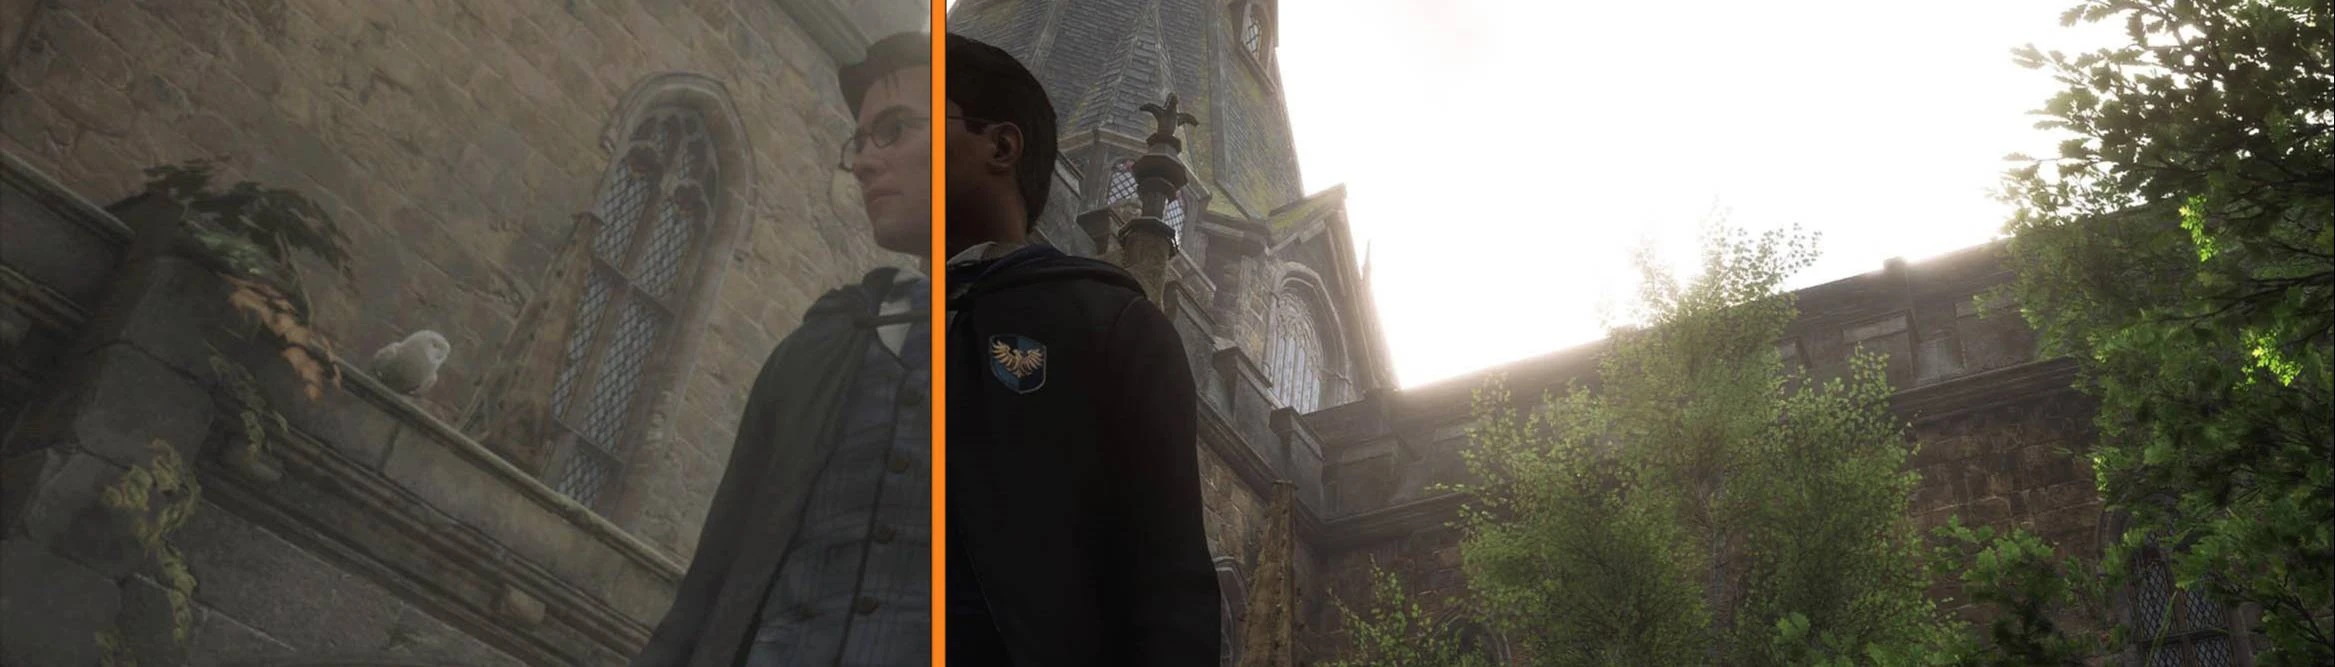 Hogwarts Legacy Player Count Drops Sharply